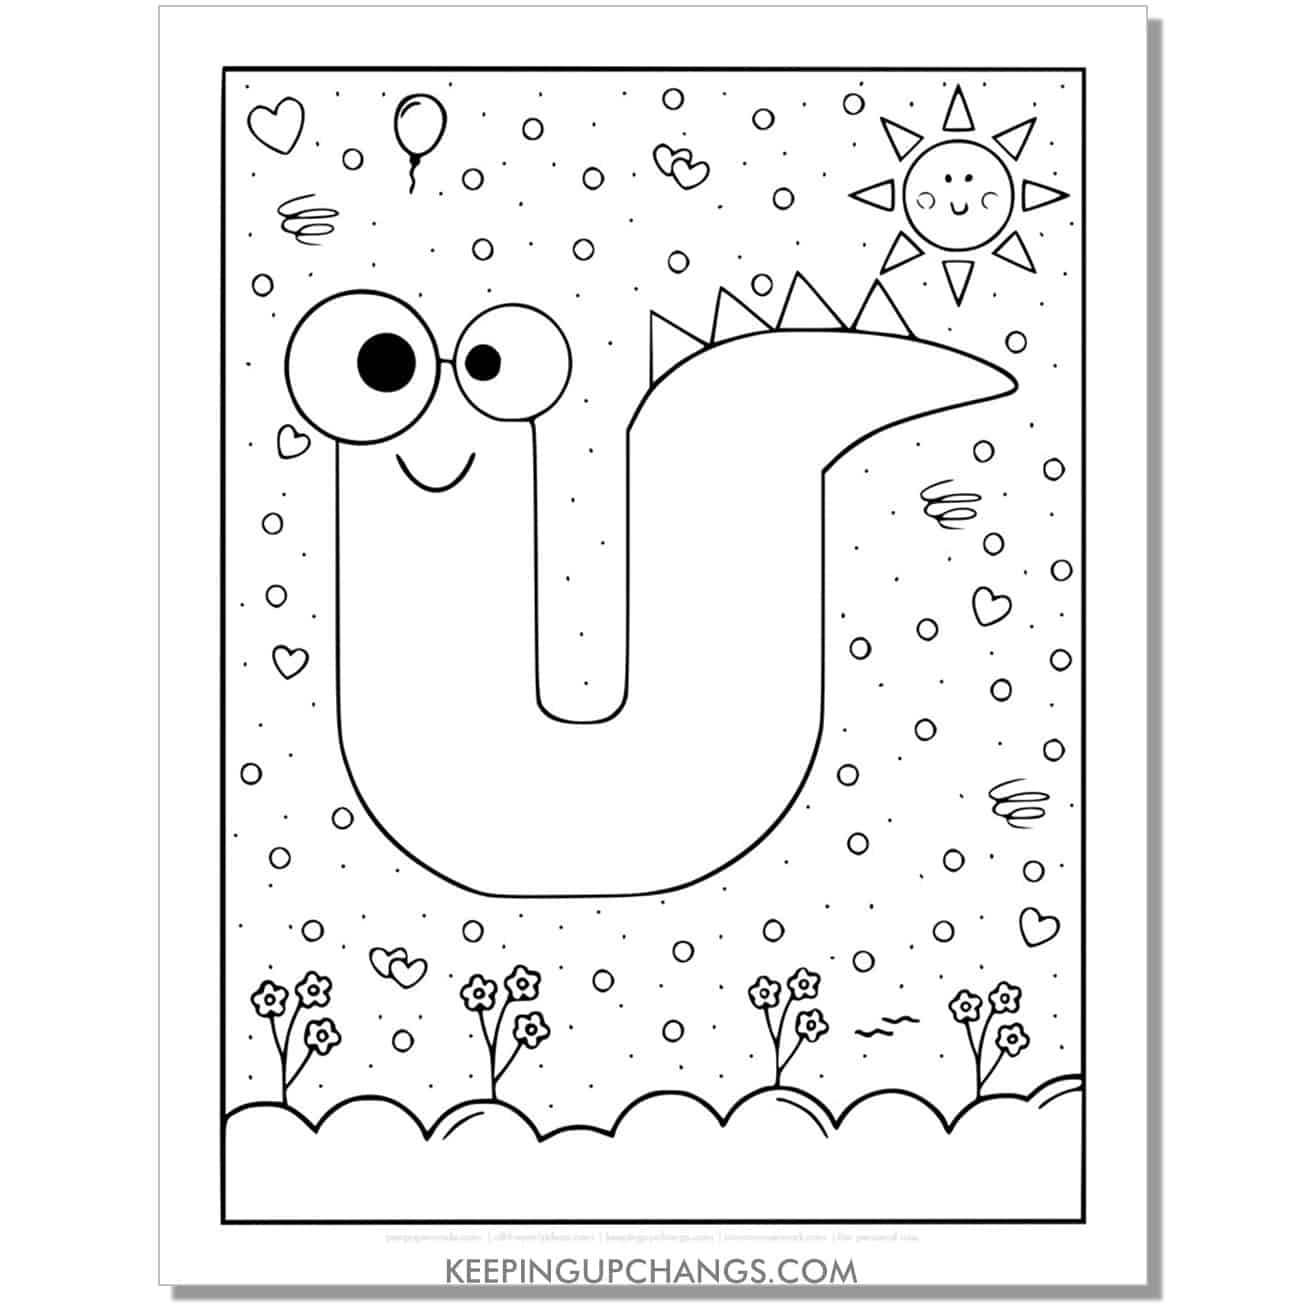 cute u coloring page with monster dinosaur letter.